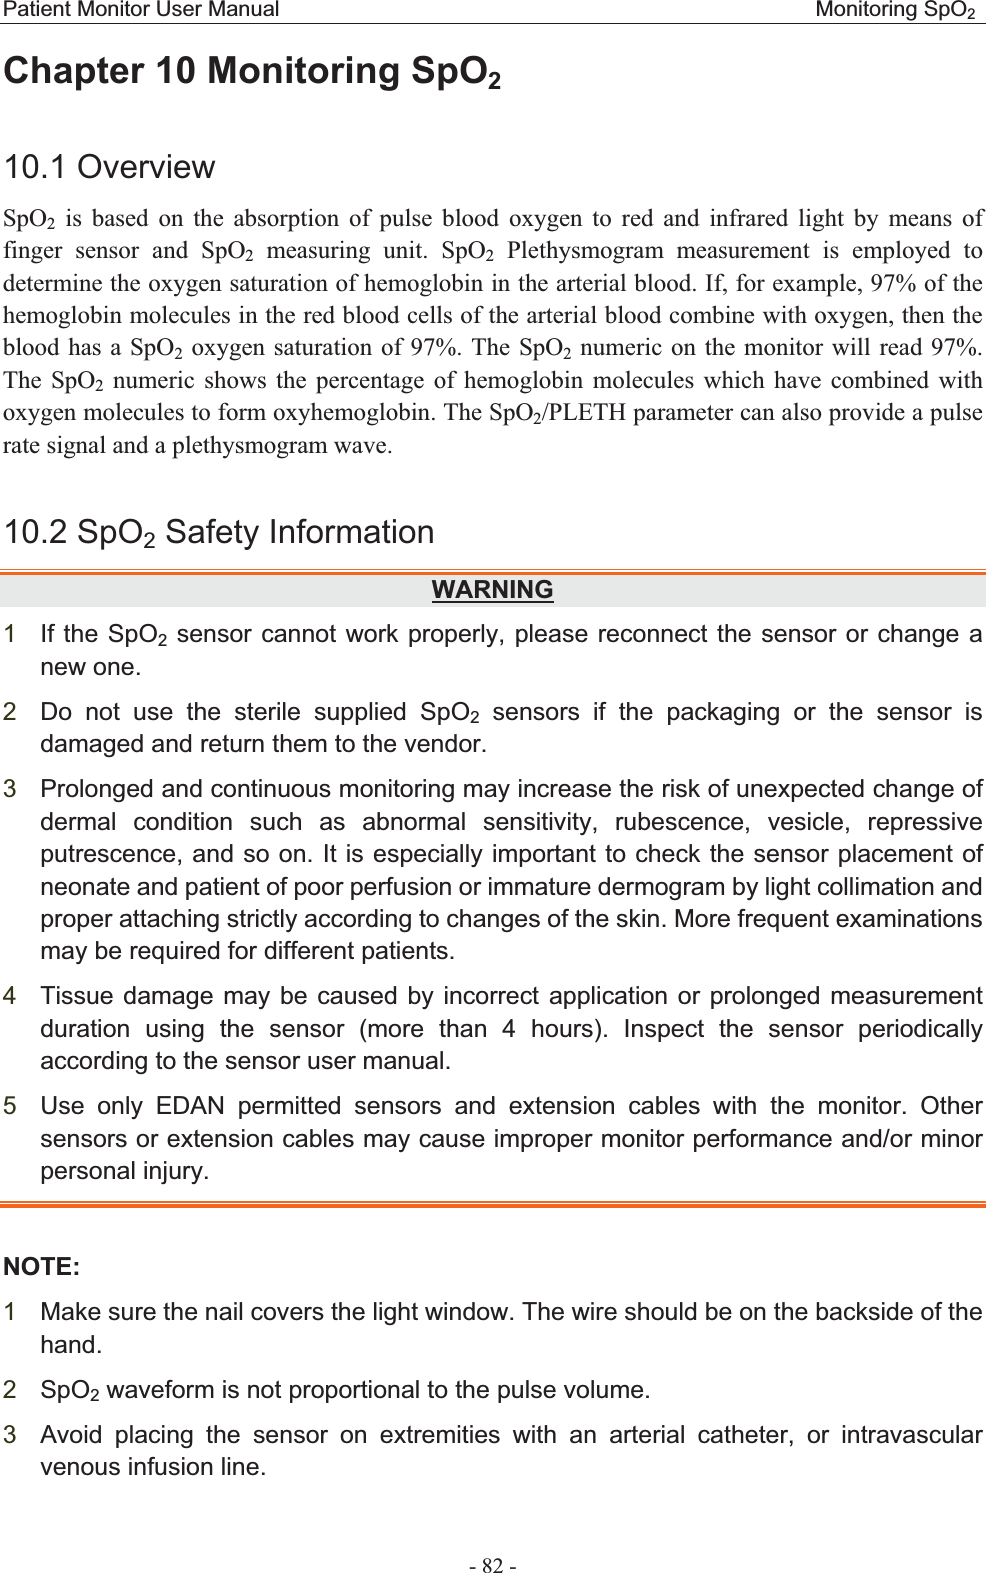 Patient Monitor User Manual                                                 Monitoring SpO2 - 82 - Chapter 10 Monitoring SpO210.1 OverviewSpO2 is based on the absorption of pulse blood oxygen to red and infrared light by means of finger sensor and SpO2 measuring unit. SpO2 Plethysmogram measurement is employed to determine the oxygen saturation of hemoglobin in the arterial blood. If, for example, 97% of the hemoglobin molecules in the red blood cells of the arterial blood combine with oxygen, then the blood has a SpO2 oxygen saturation of 97%. The SpO2 numeric on the monitor will read 97%. The SpO2 numeric shows the percentage of hemoglobin molecules which have combined with oxygen molecules to form oxyhemoglobin. The SpO2/PLETH parameter can also provide a pulse rate signal and a plethysmogram wave. 10.2 SpO2 Safety InformationWARNING1If the SpO2 sensor cannot work properly, please reconnect the sensor or change a new one. 2Do not use the sterile supplied SpO2 sensors if the packaging or the sensor is damaged and return them to the vendor. 3Prolonged and continuous monitoring may increase the risk of unexpected change of dermal condition such as abnormal sensitivity, rubescence, vesicle, repressive putrescence, and so on. It is especially important to check the sensor placement of neonate and patient of poor perfusion or immature dermogram by light collimation and proper attaching strictly according to changes of the skin. More frequent examinations may be required for different patients. 4Tissue damage may be caused by incorrect application or prolonged measurement duration using the sensor (more than 4 hours). Inspect the sensor periodically according to the sensor user manual. 5Use only EDAN permitted sensors and extension cables with the monitor. Other sensors or extension cables may cause improper monitor performance and/or minor personal injury. NOTE:1Make sure the nail covers the light window. The wire should be on the backside of the hand.  2SpO2 waveform is not proportional to the pulse volume. 3Avoid placing the sensor on extremities with an arterial catheter, or intravascular venous infusion line. 